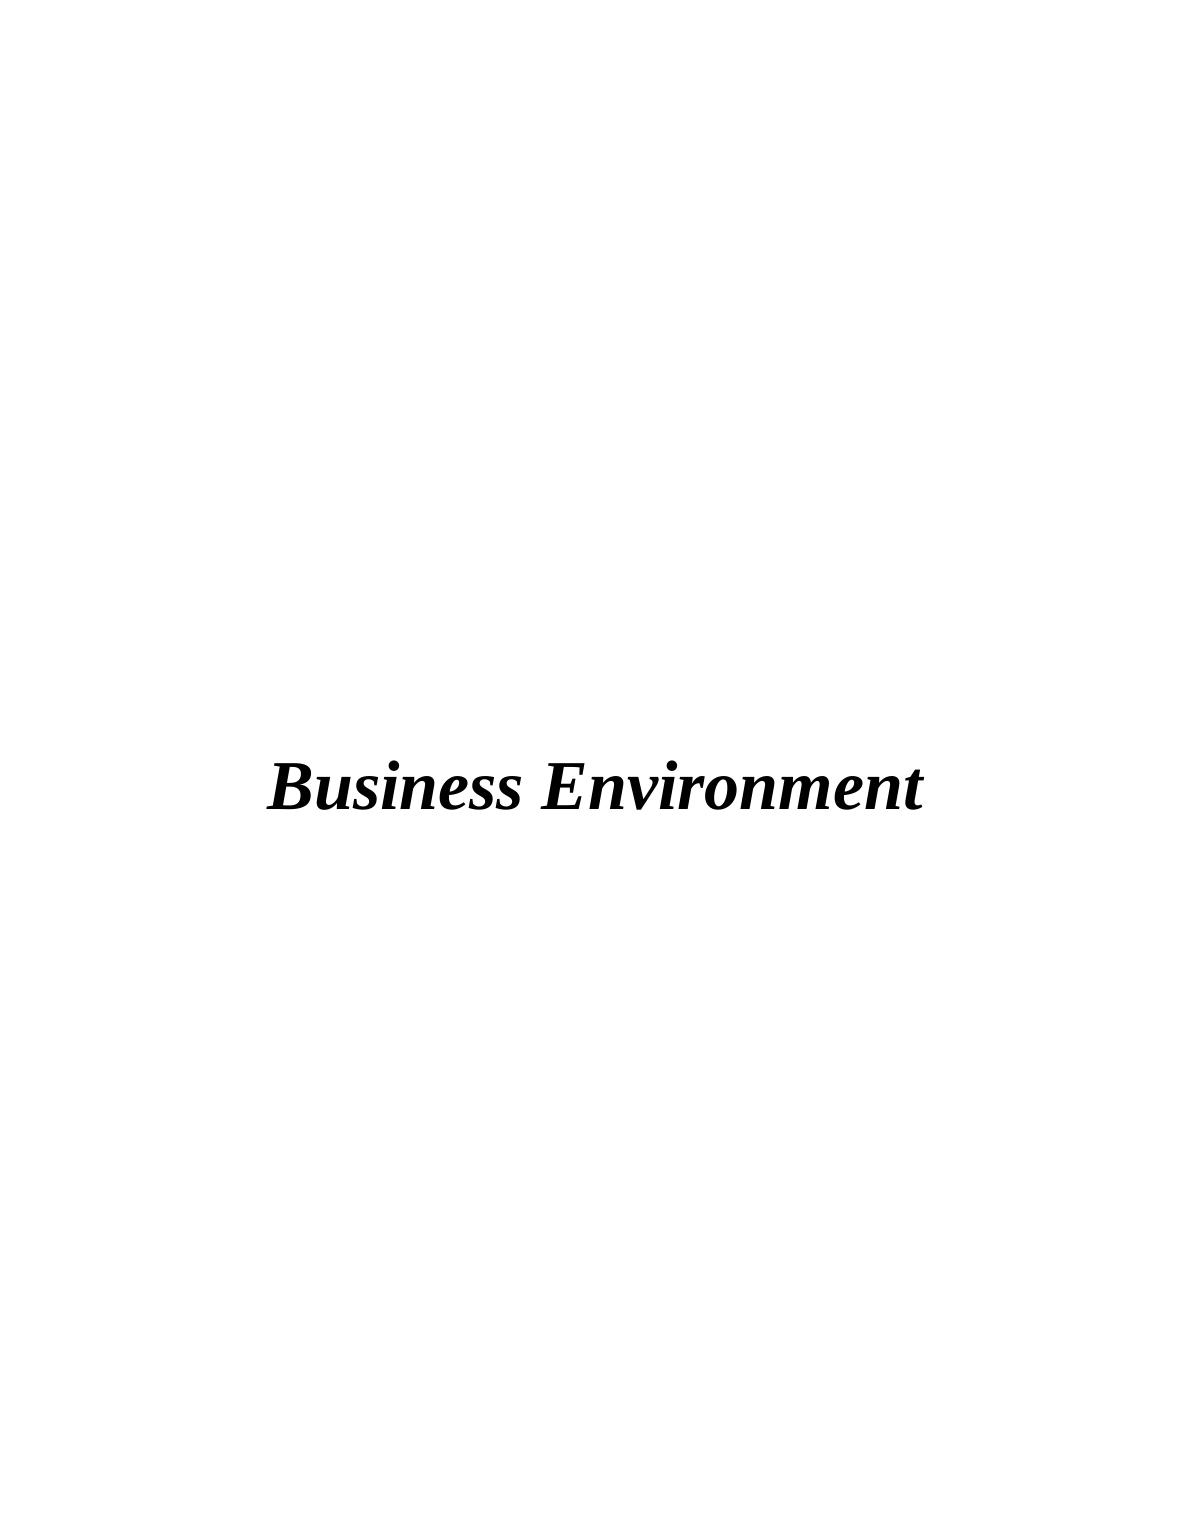 (doc) Business Environment Report_1